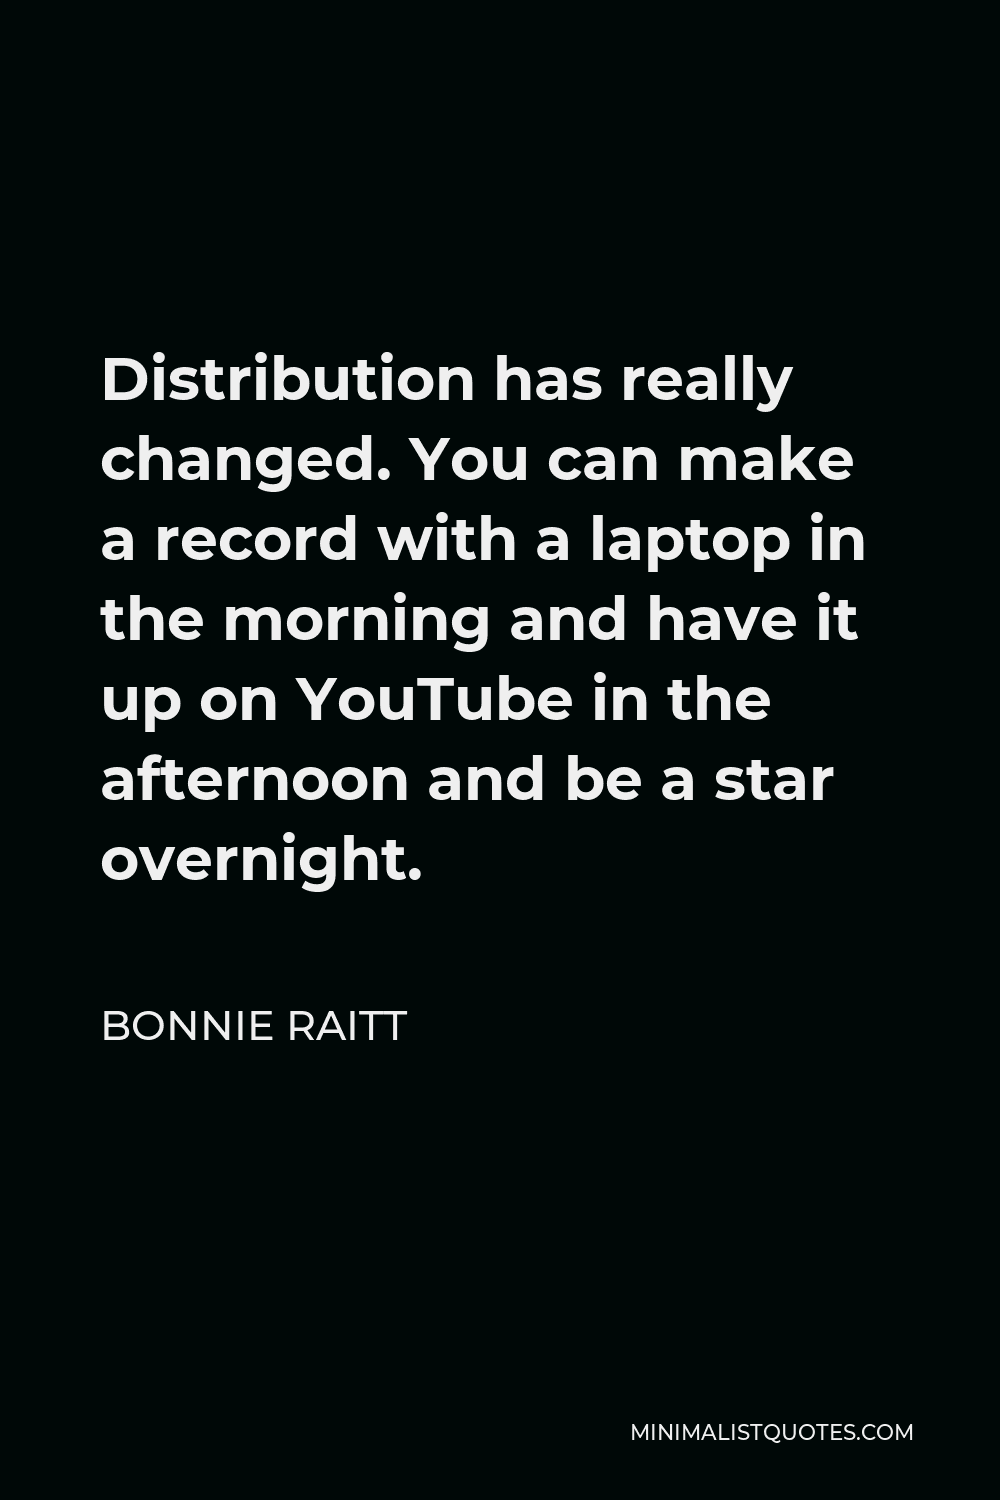 Bonnie Raitt Quote - Distribution has really changed. You can make a record with a laptop in the morning and have it up on YouTube in the afternoon and be a star overnight.